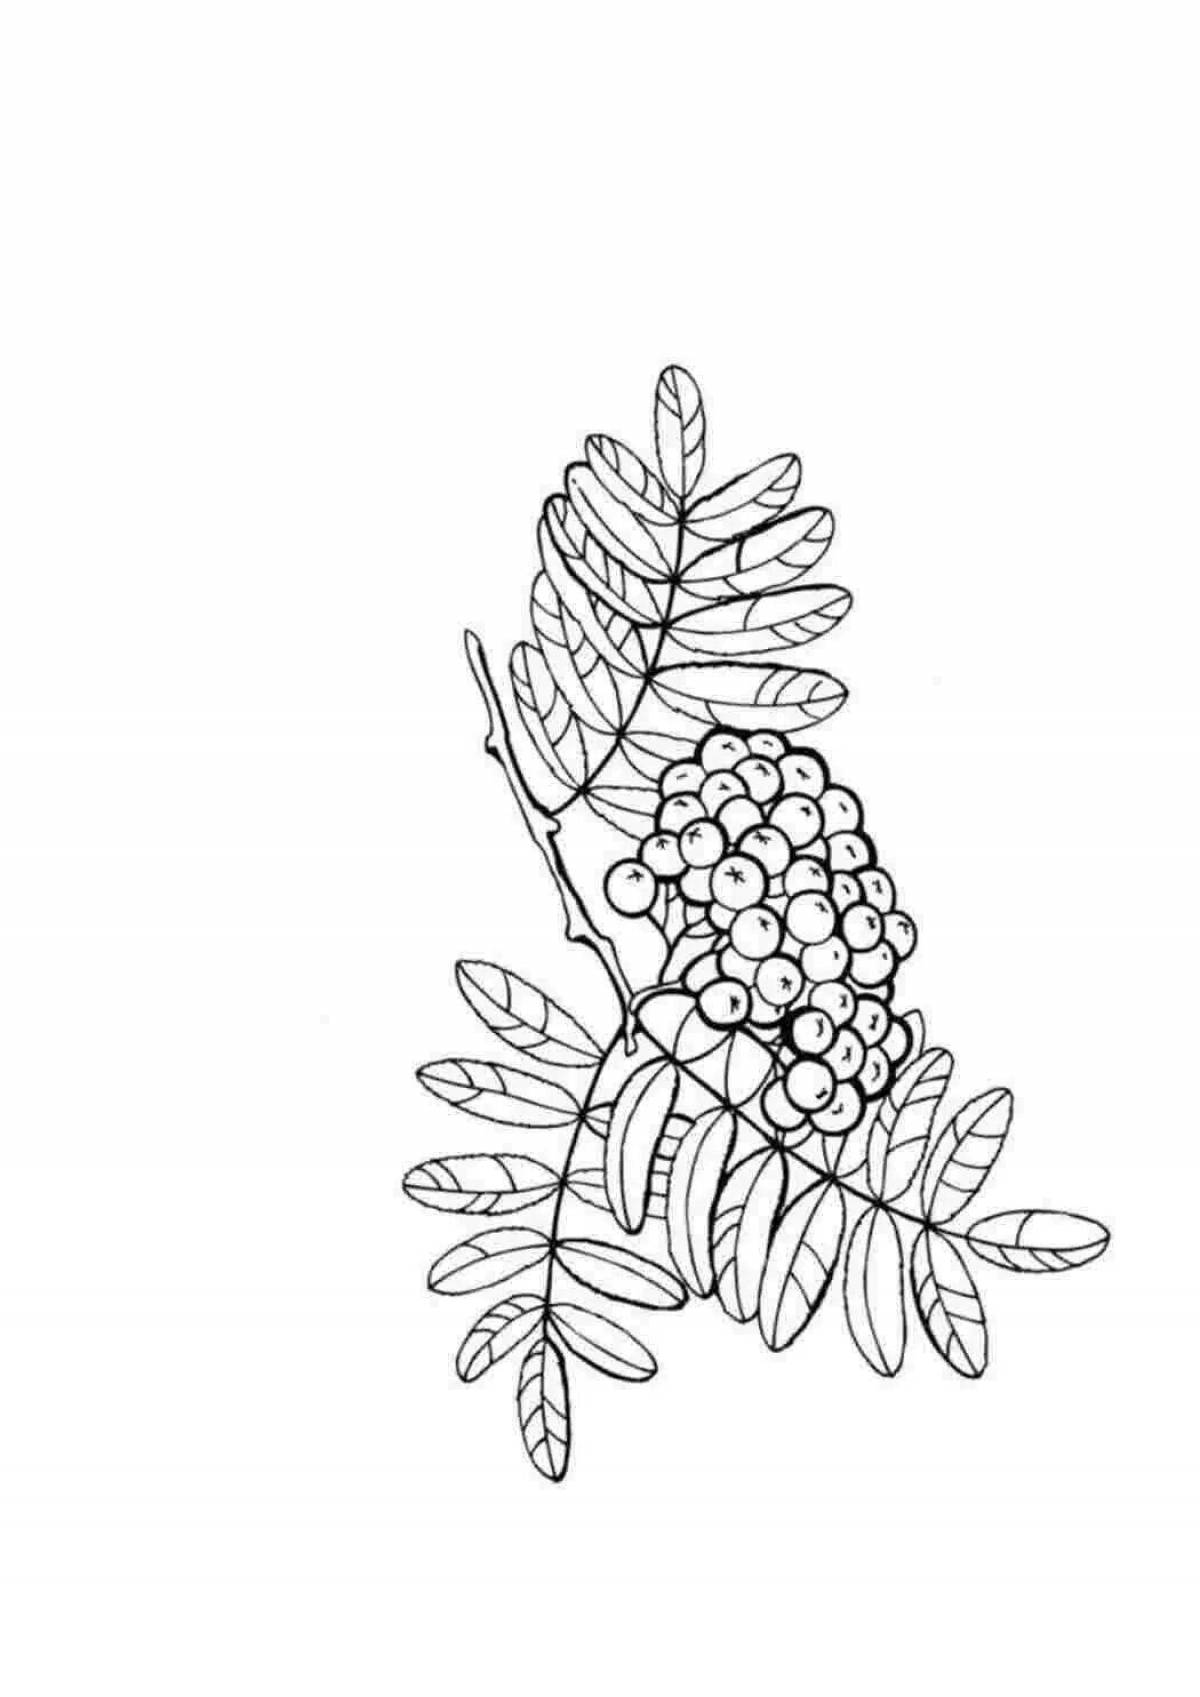 Serendipitous rowan berry coloring page